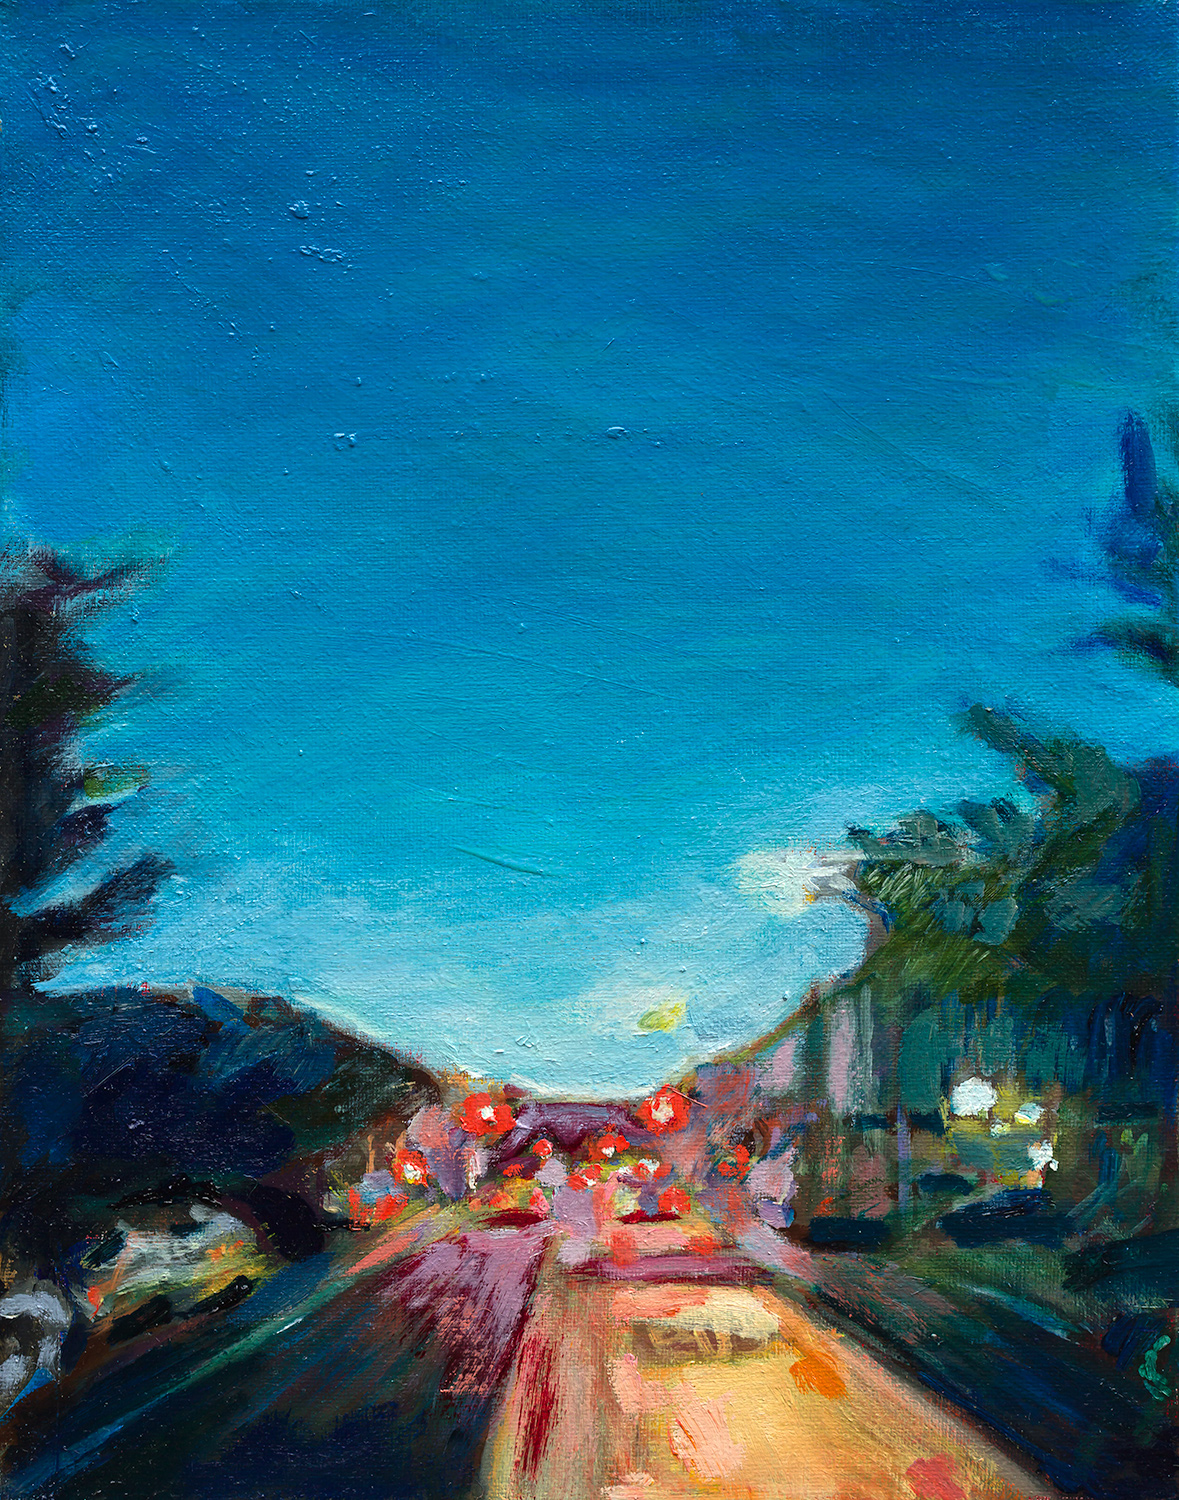 Oil Painting of Rogers Ave Brooklyn at Dusk, by Noel Hefele with a deep blue evening sky and red lights of cars in the distance.